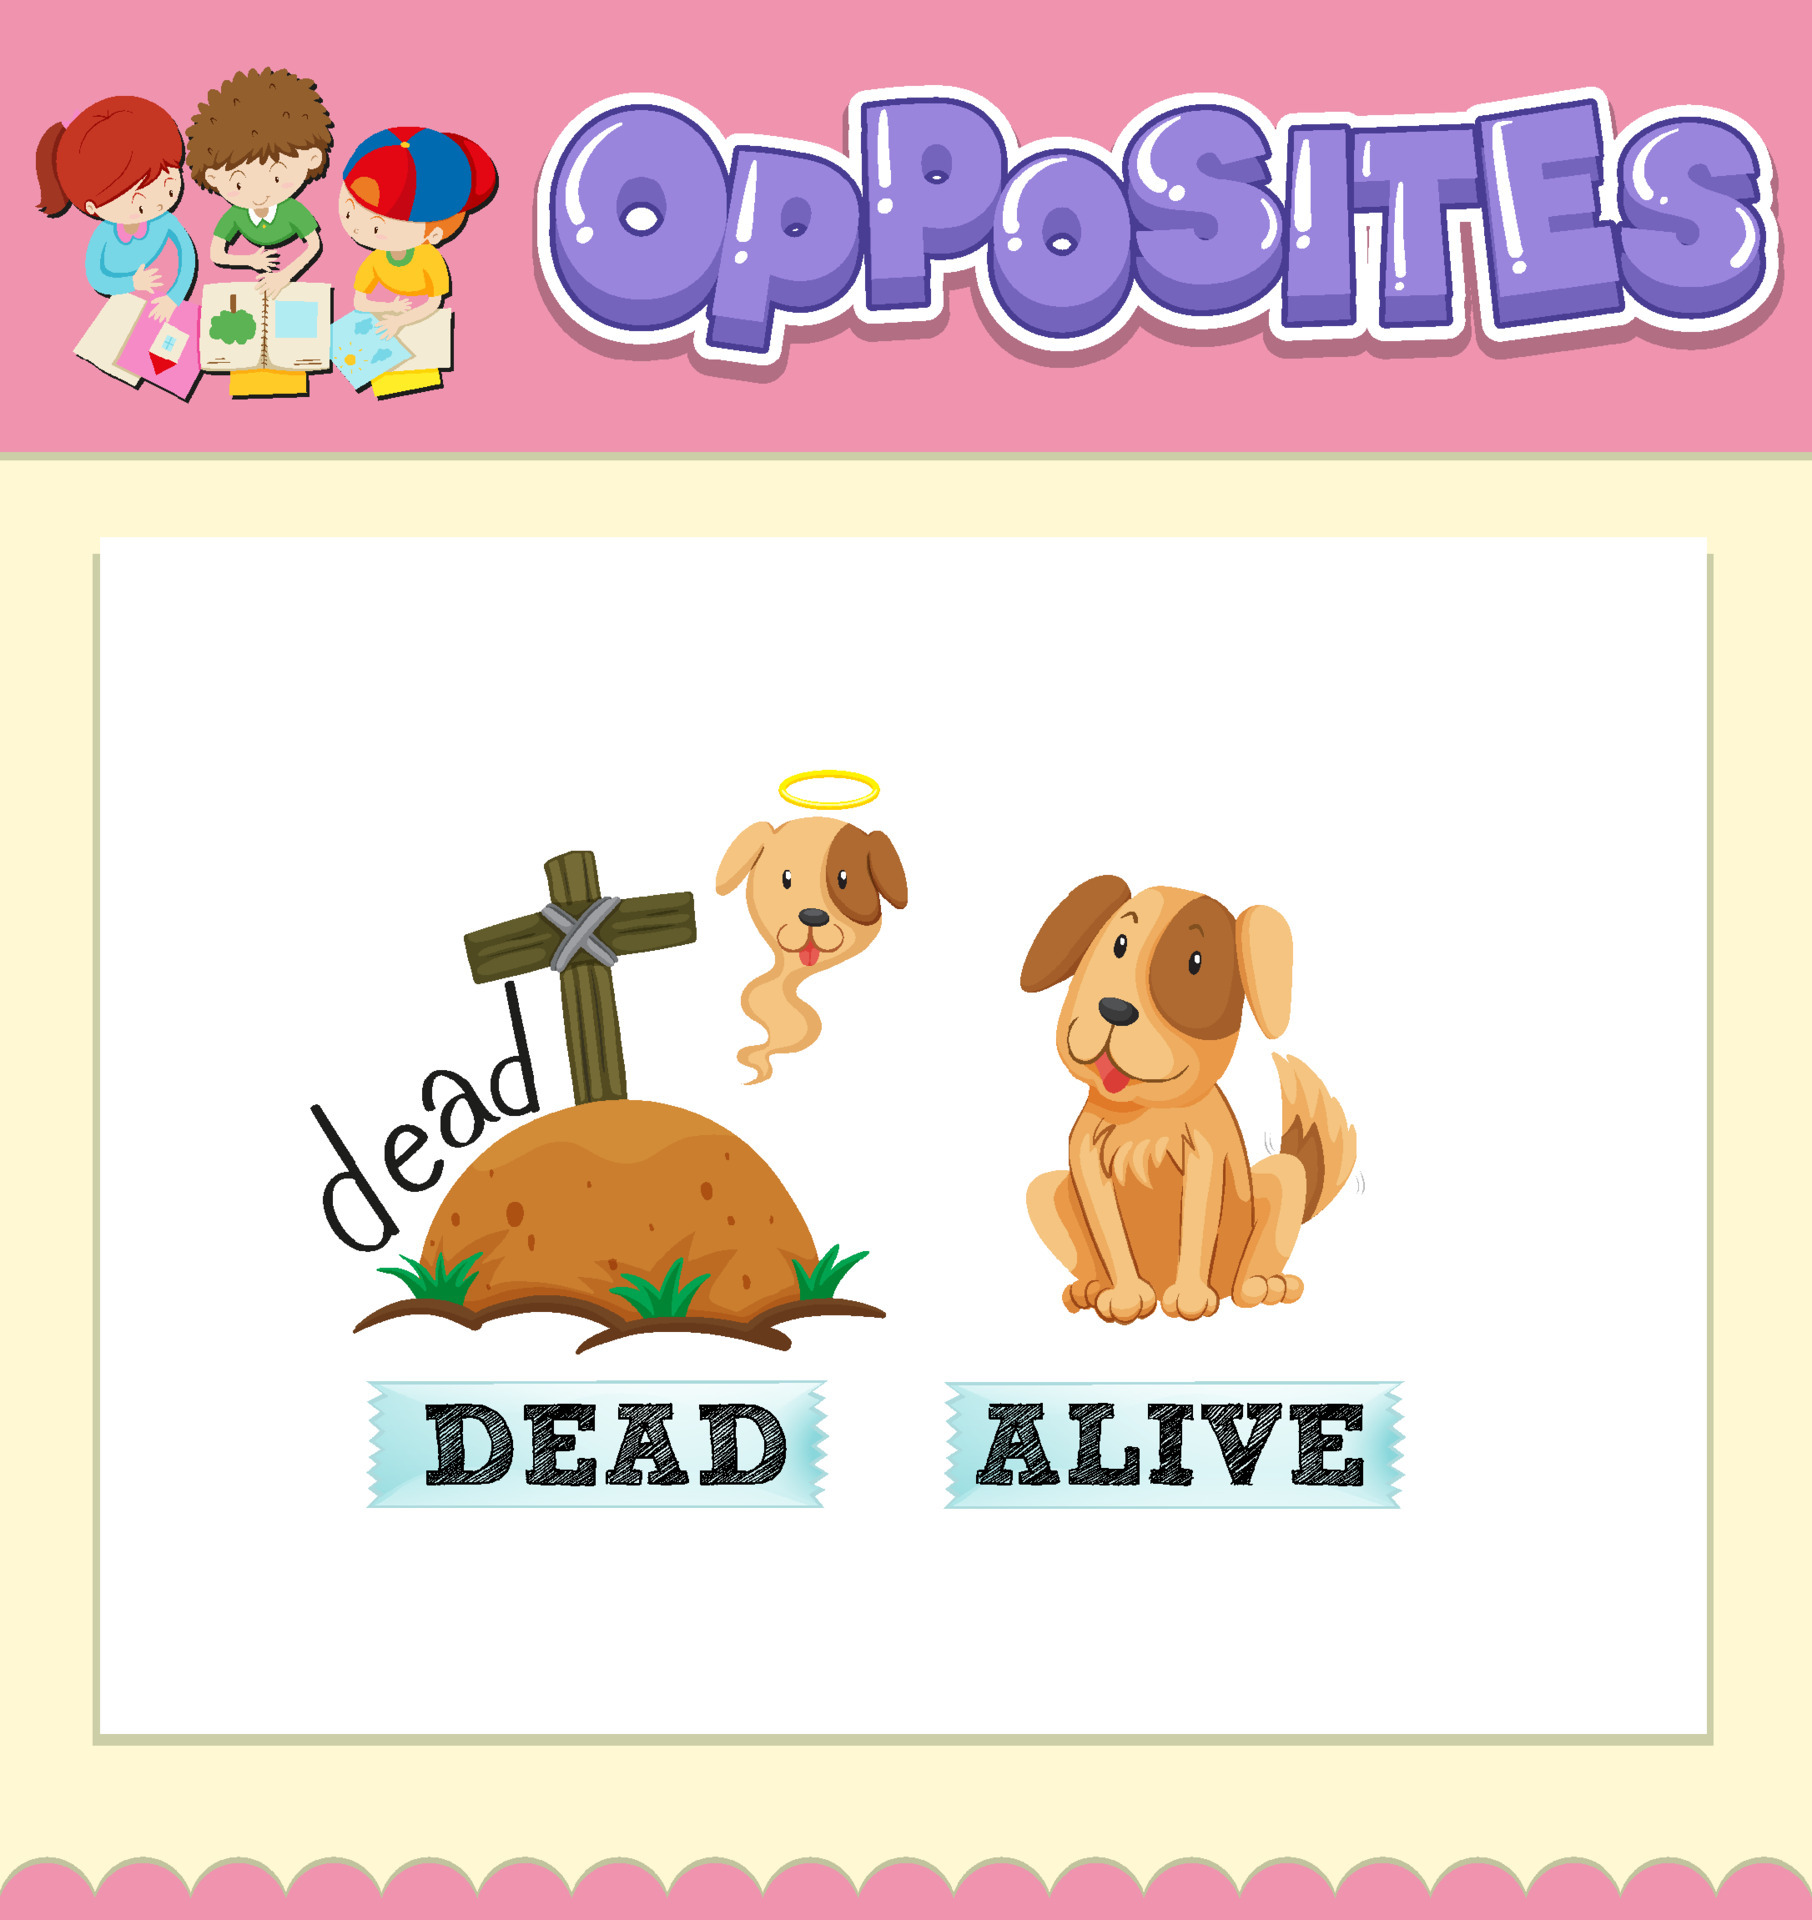 Opposite adjectives dead and alive 294516 Vector Art at Vecteezy